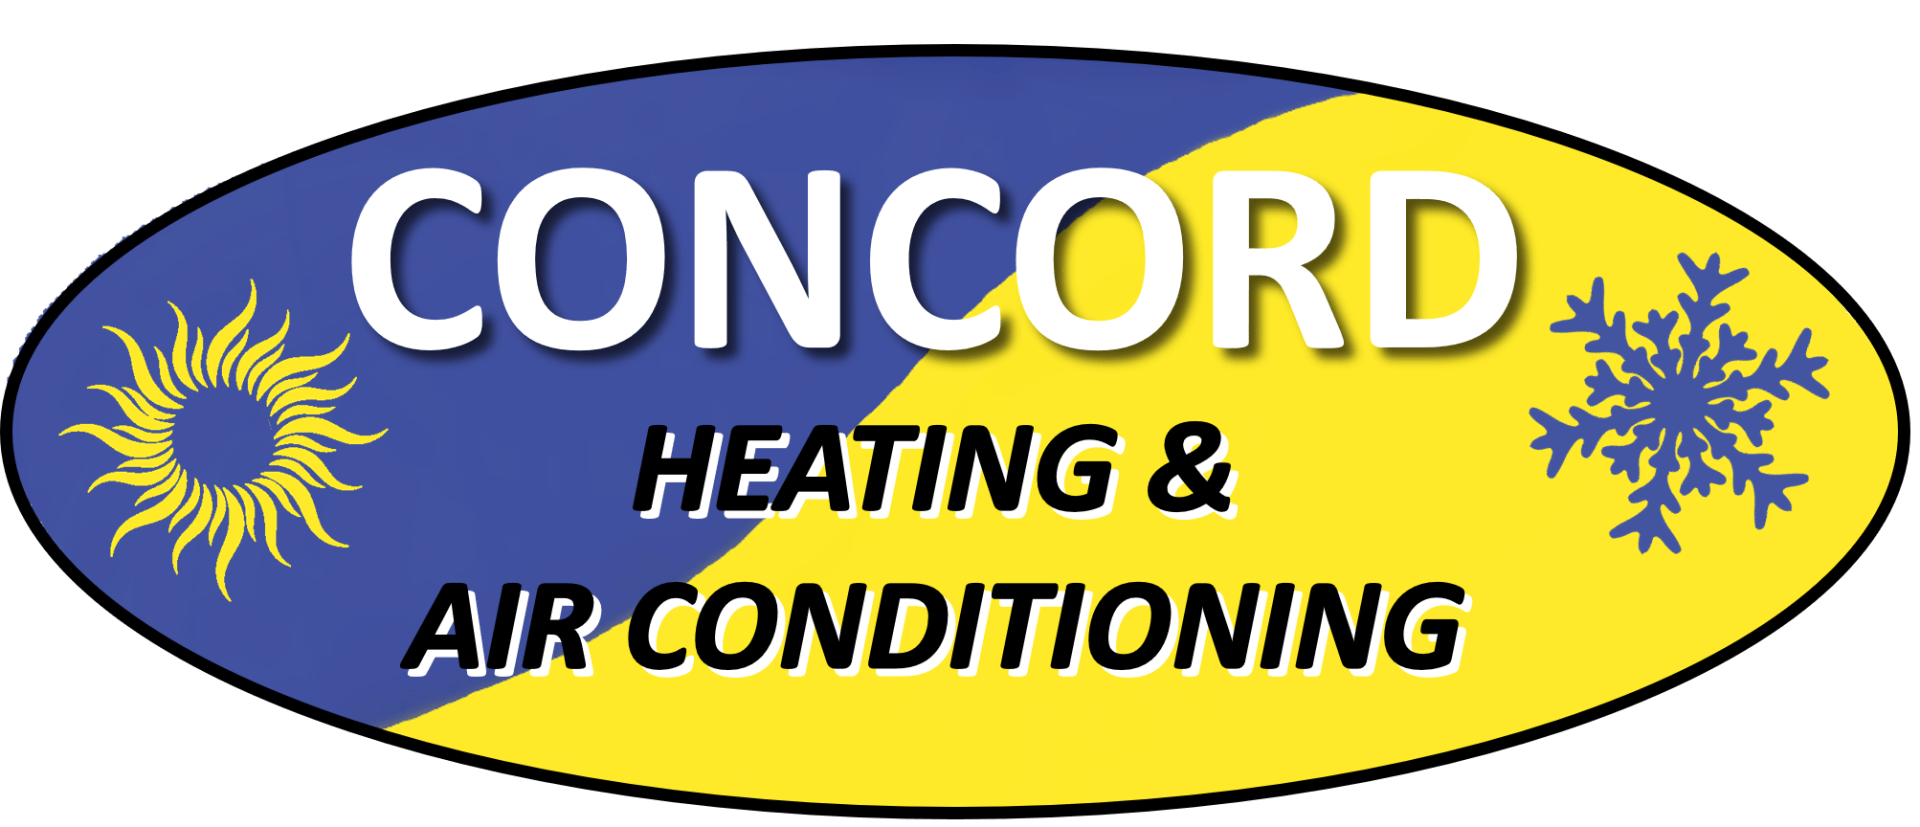 Concord Heating & Air conditioning